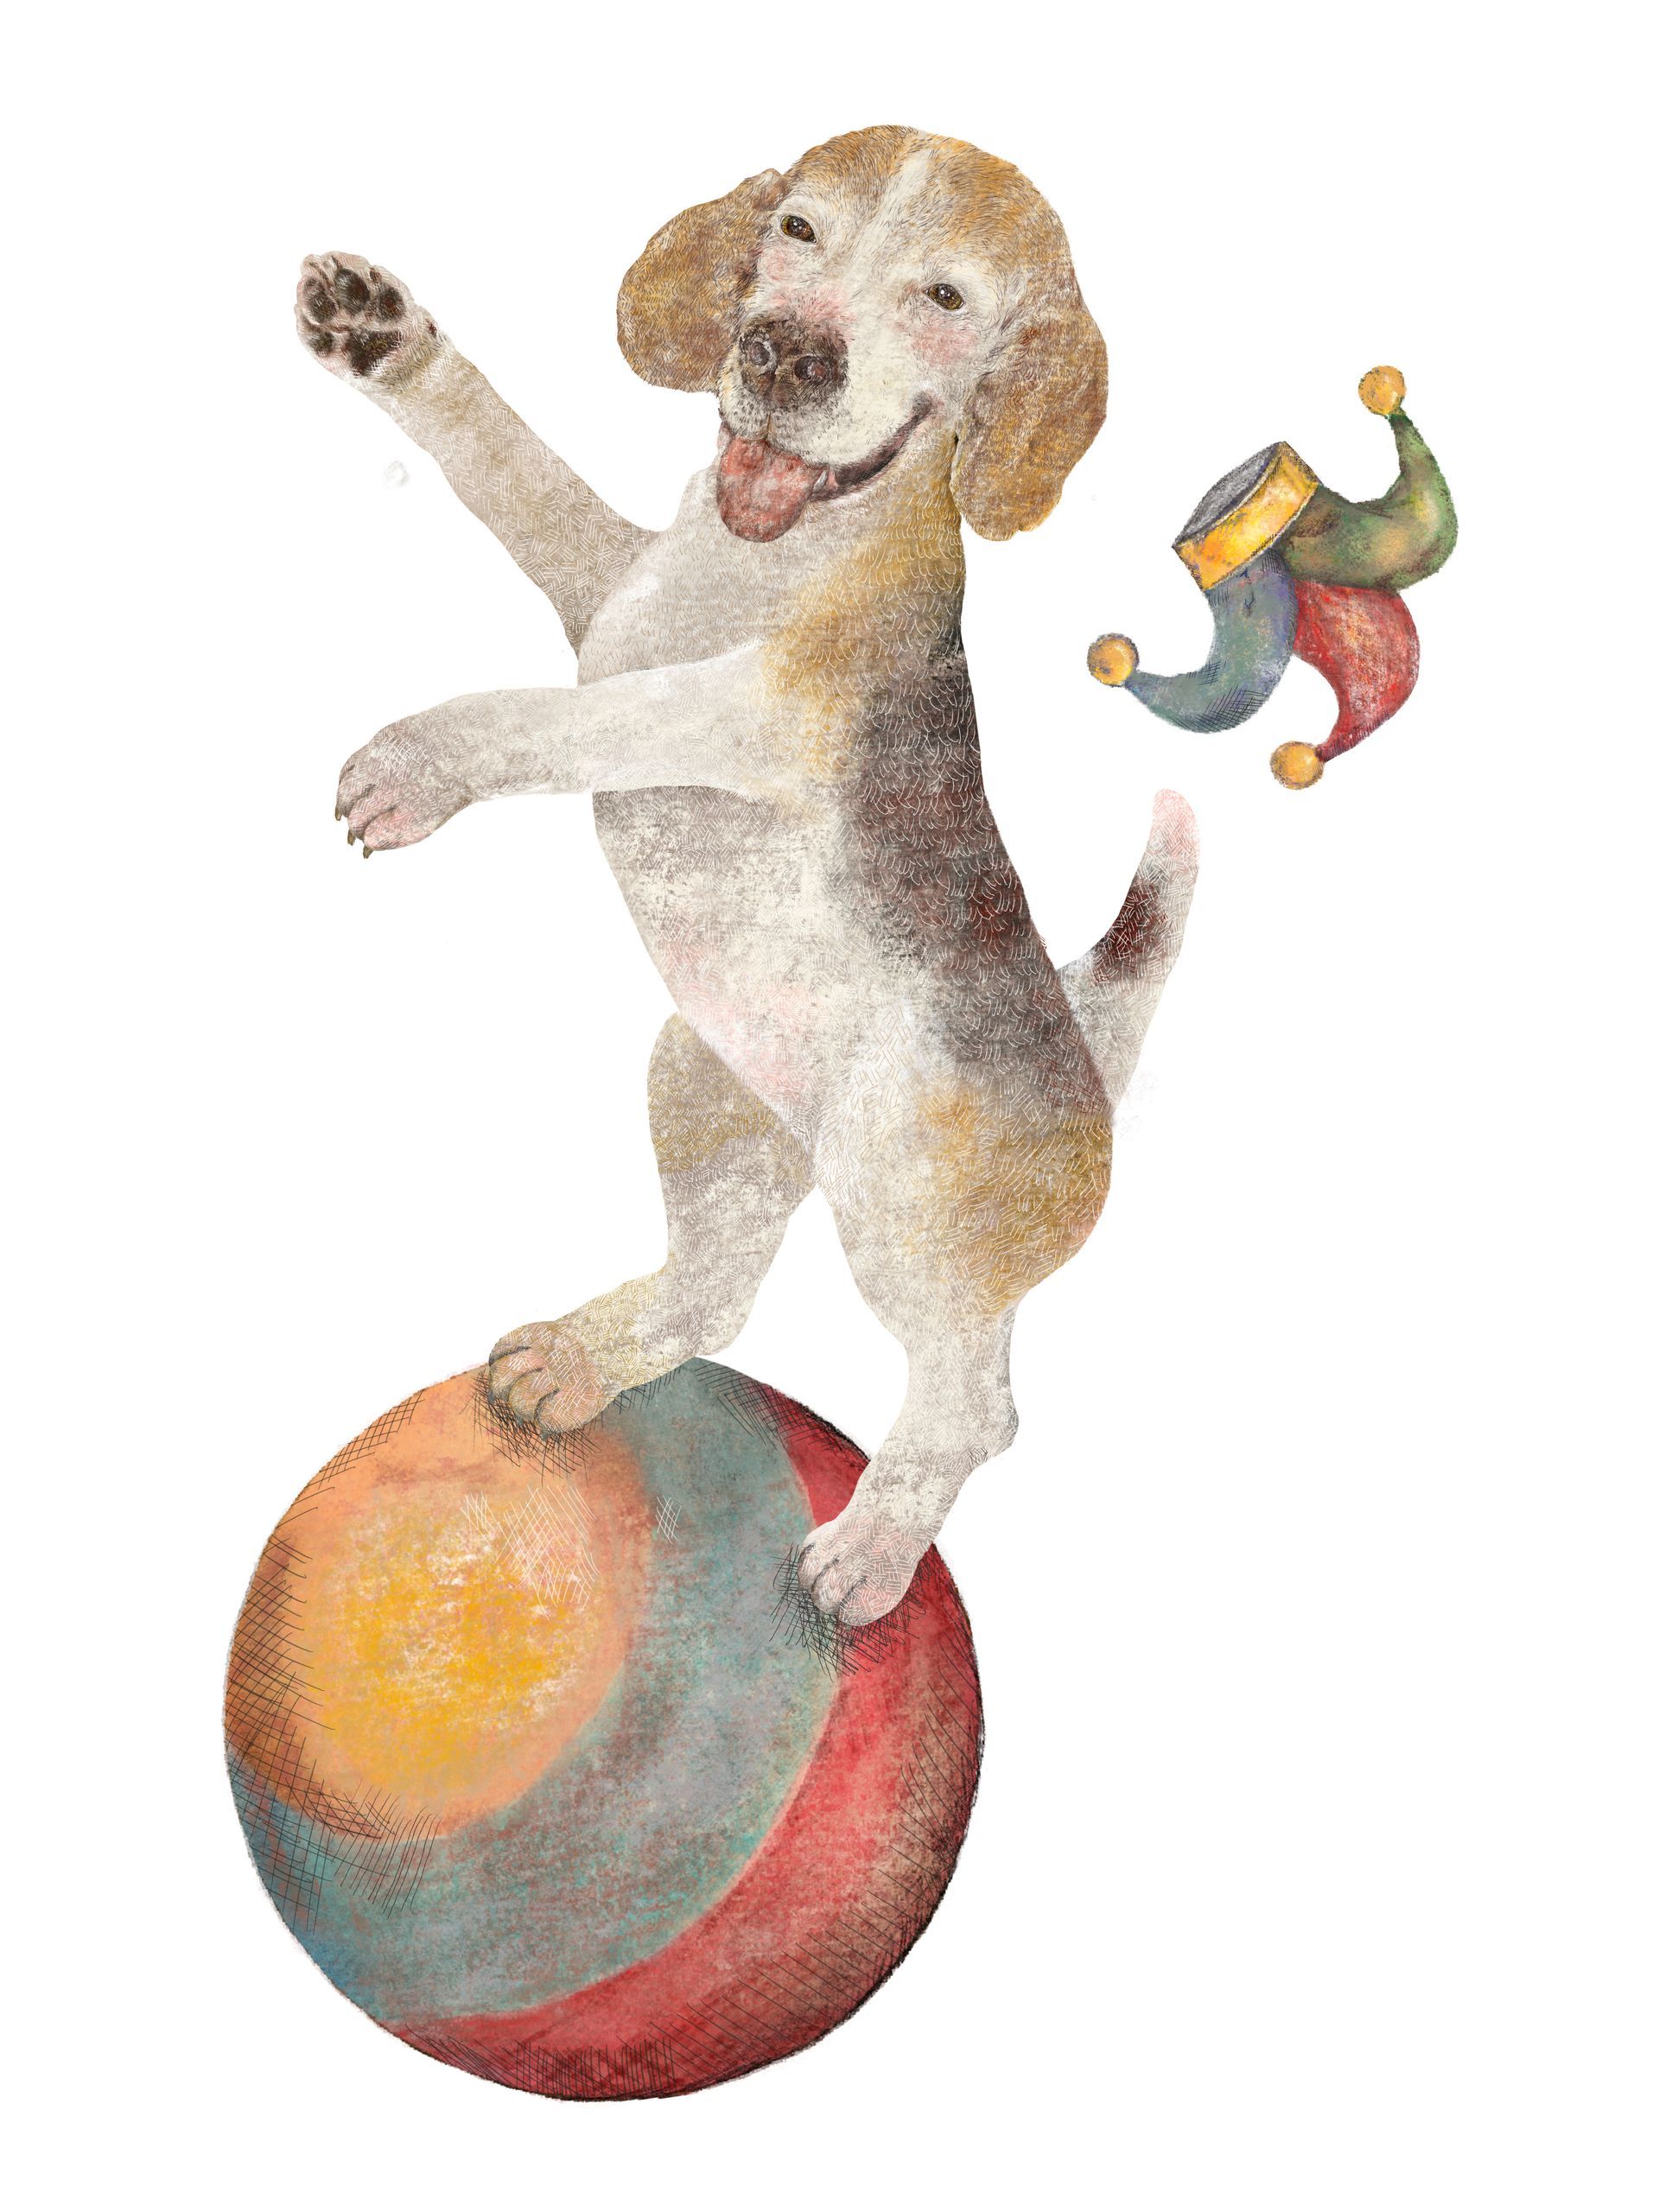 A dog is balancing on a ball with a jester hat behind it